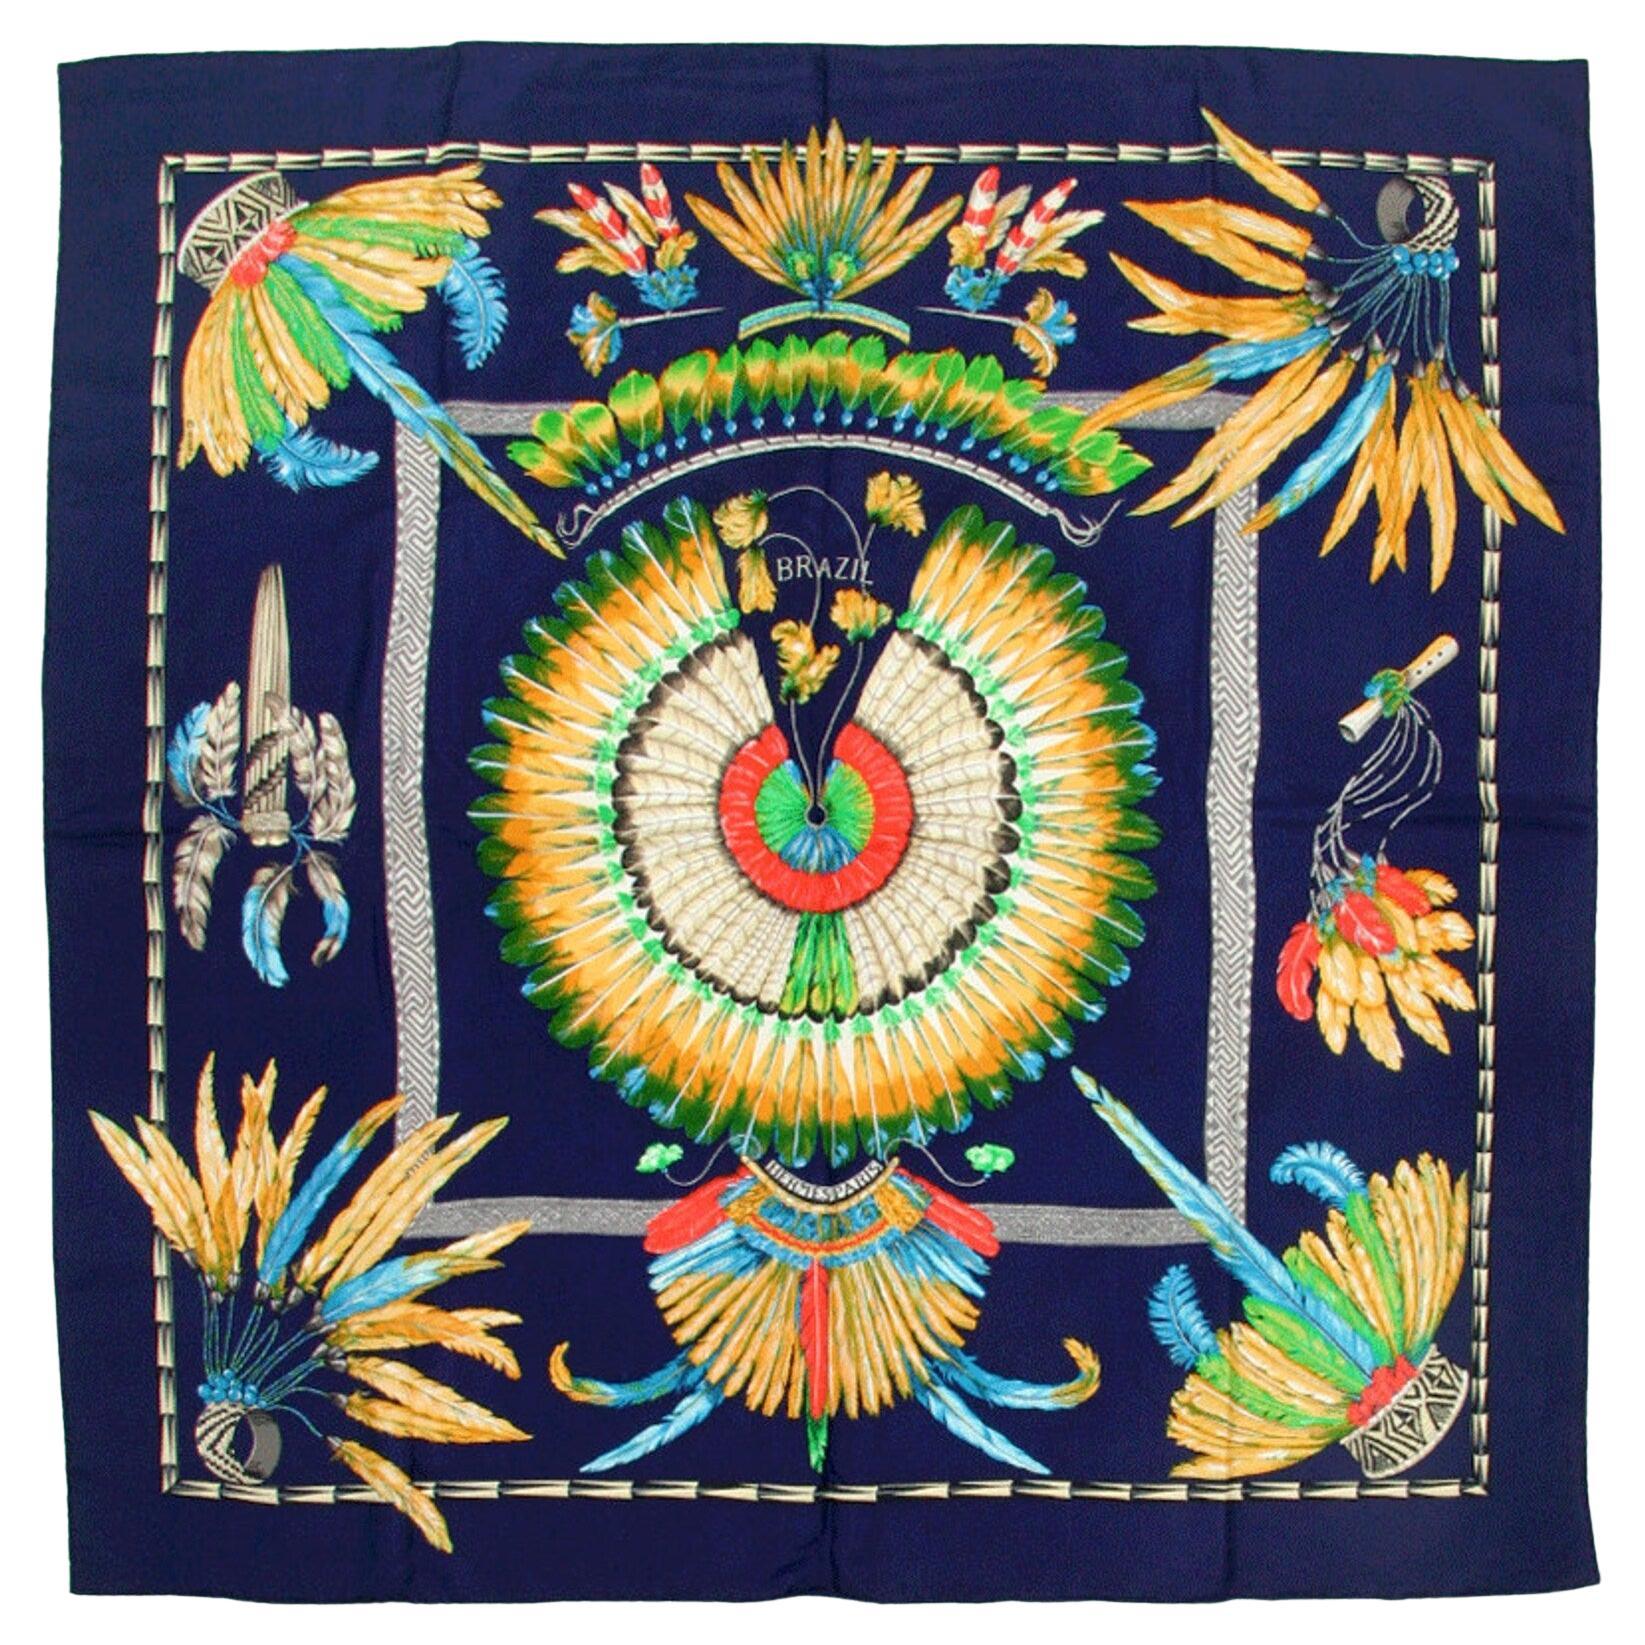 Hermes "Brazil" 90cm Silk Twill Scarf by Laurence Bourthoumieux Toutsy For Sale